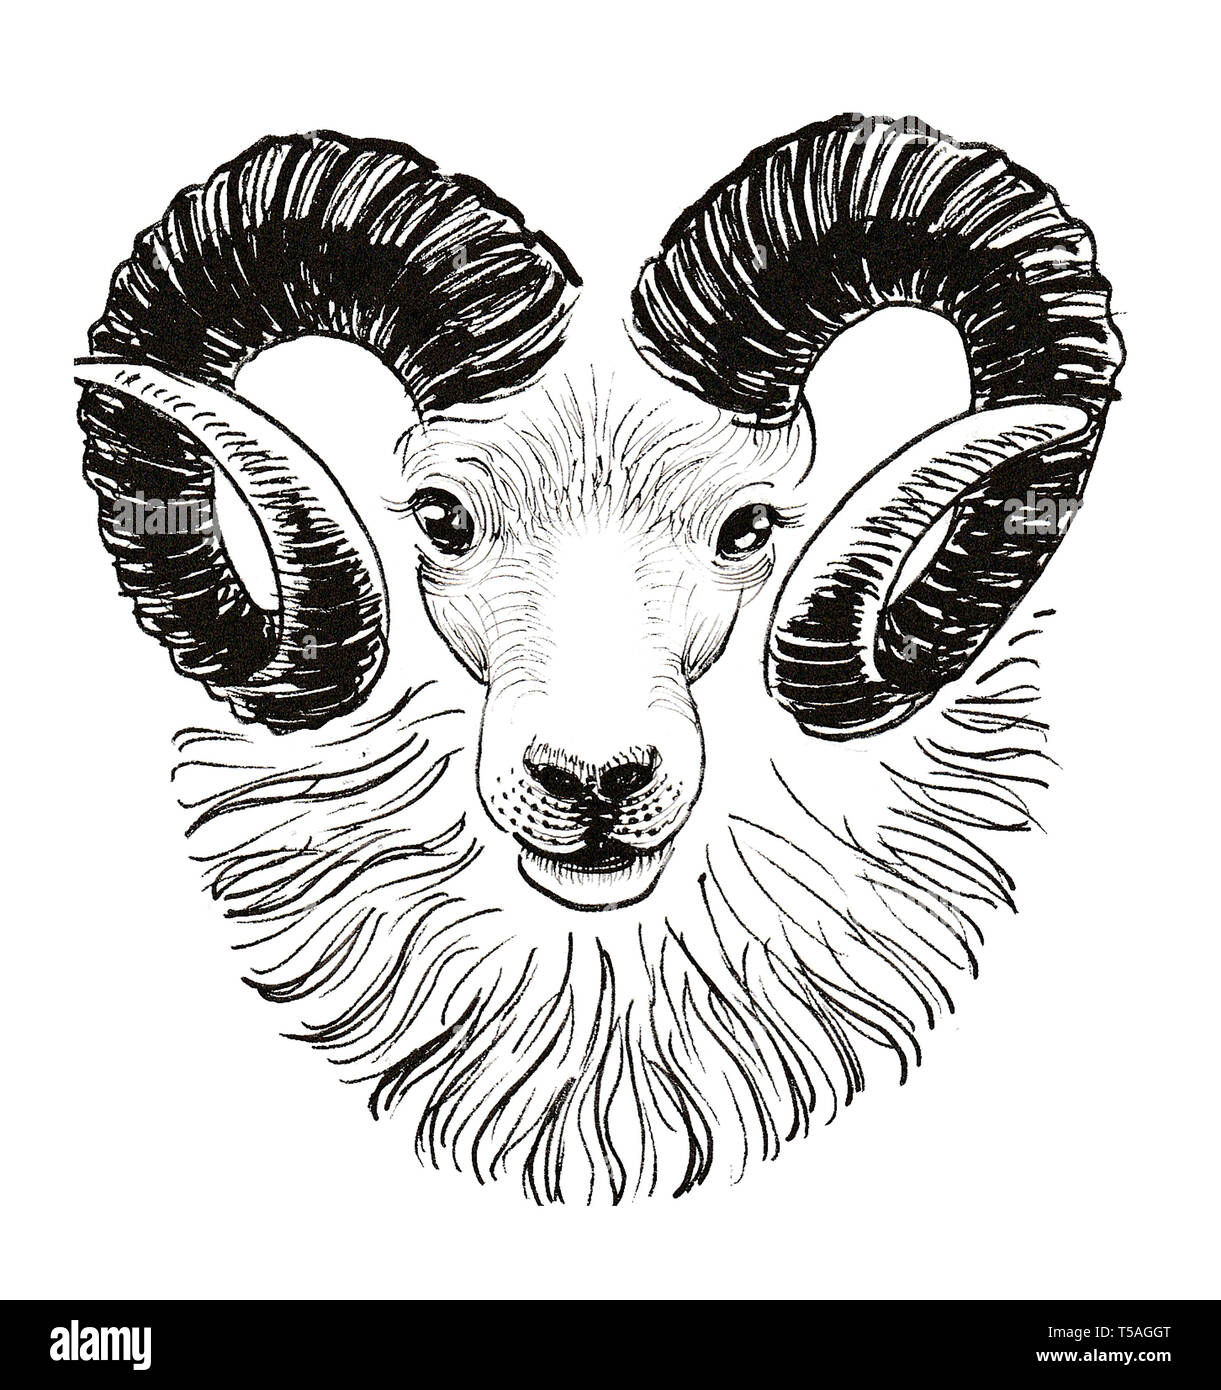 Ram head. Ink black and white drawing Stock Photo - Alamy